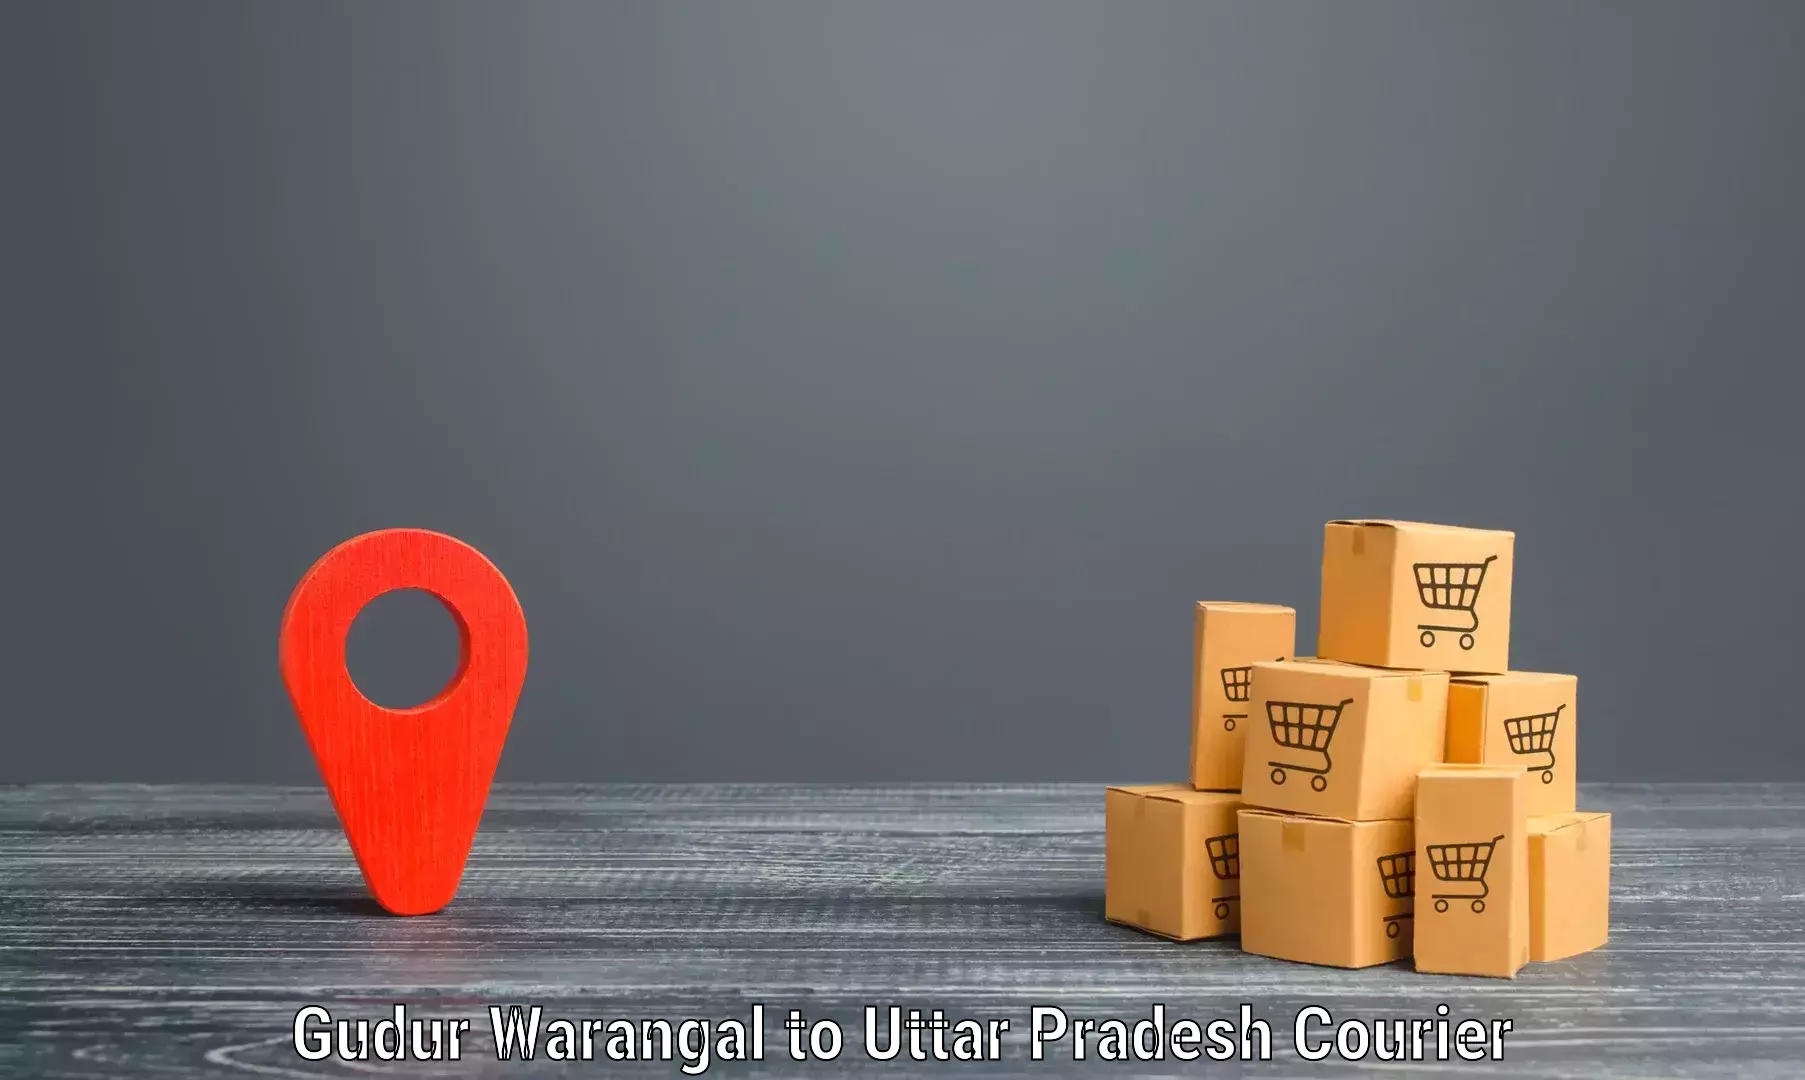 State-of-the-art courier technology Gudur Warangal to Dhampur